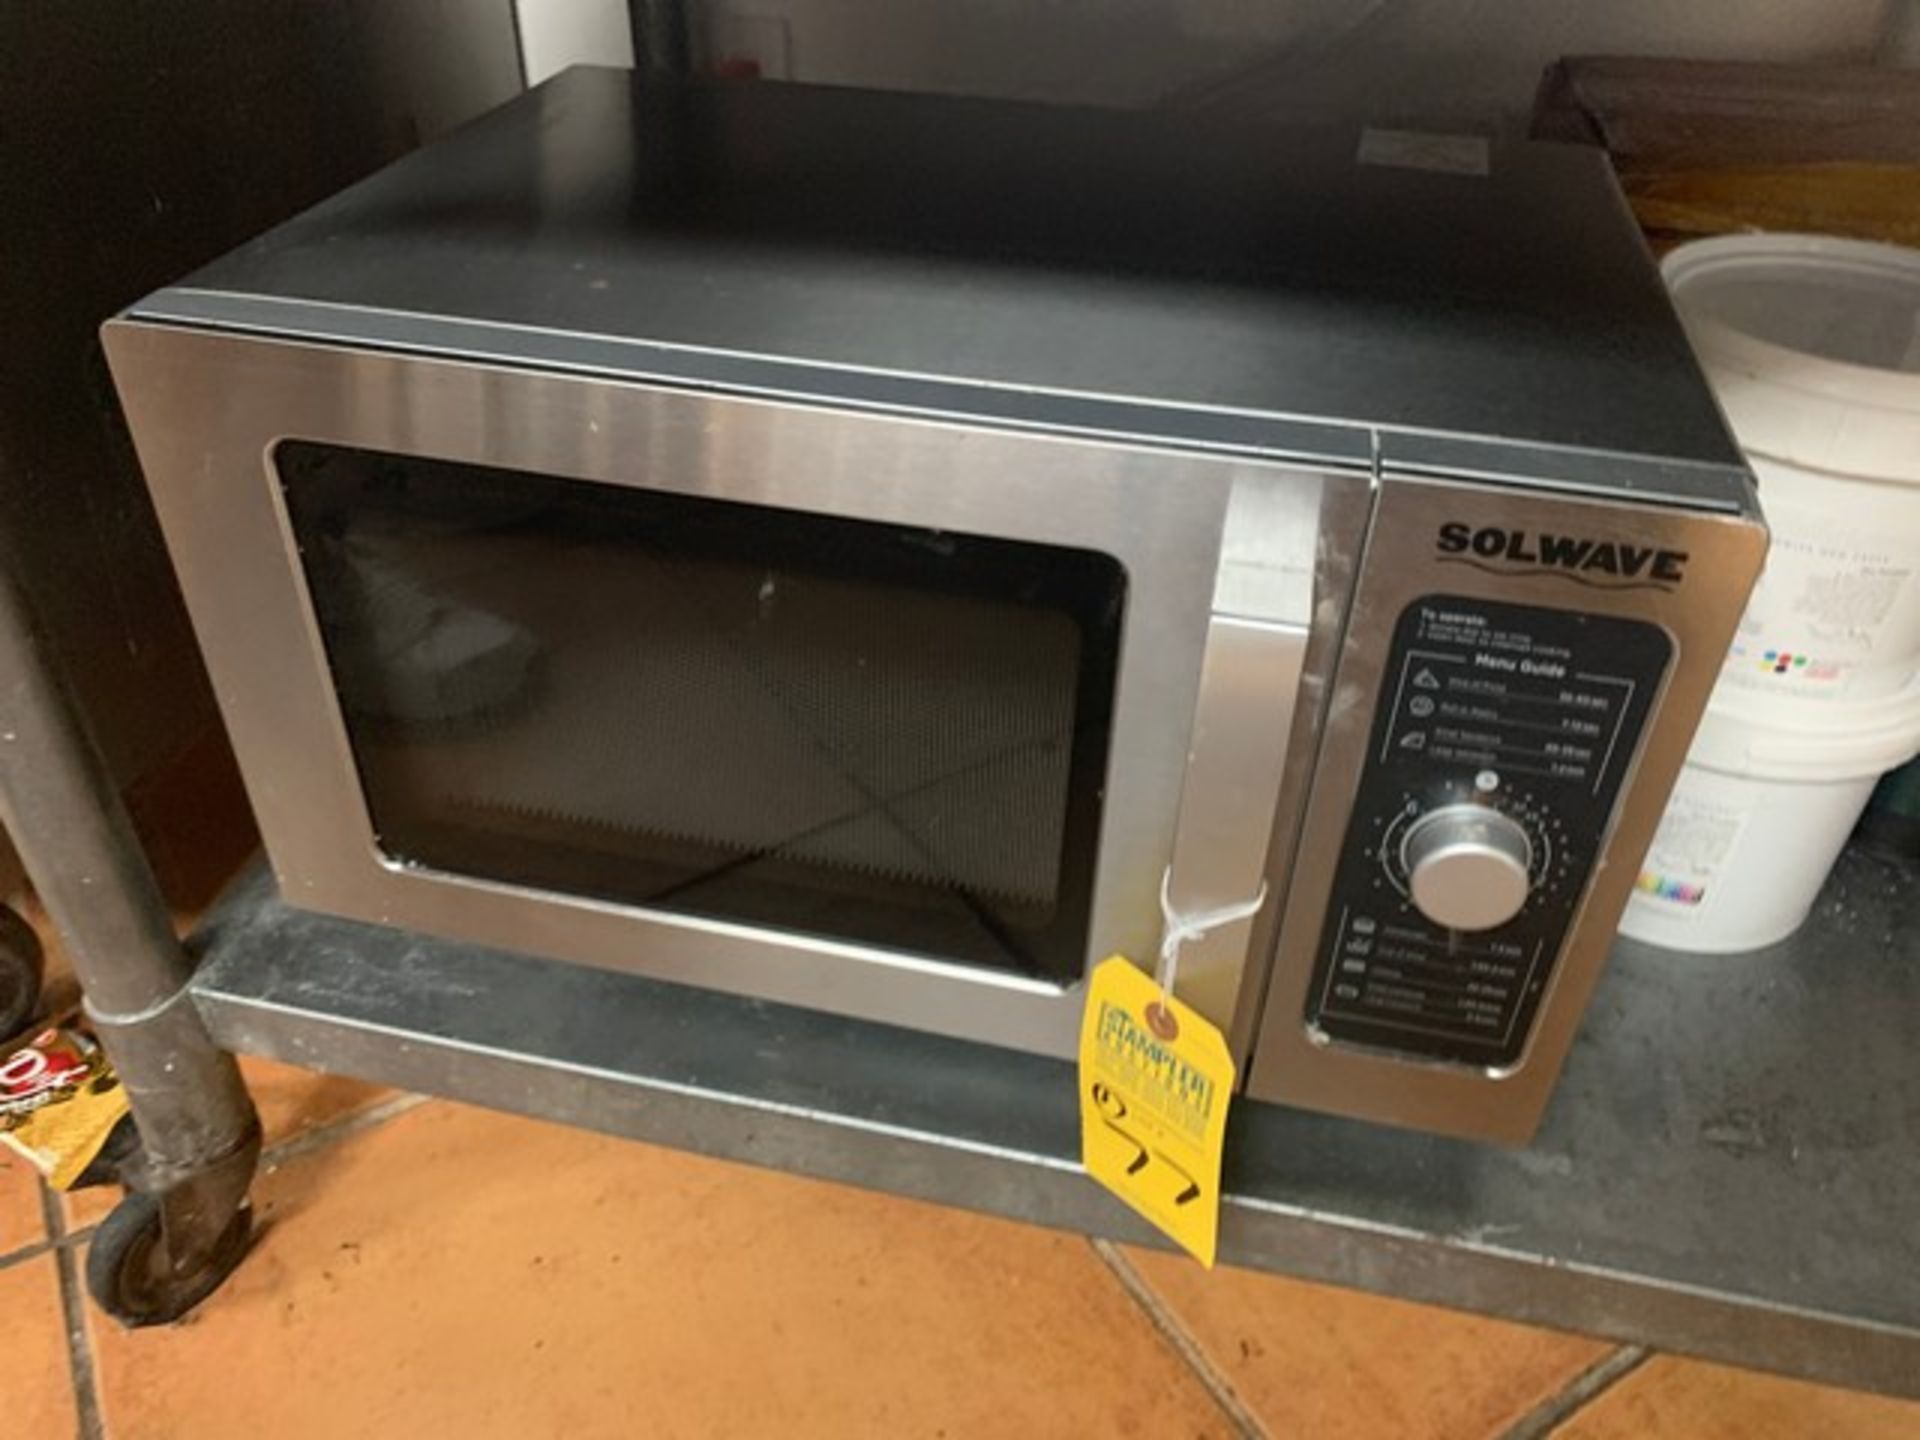 SOLWAVE COMMERCIAL MICROWAVE